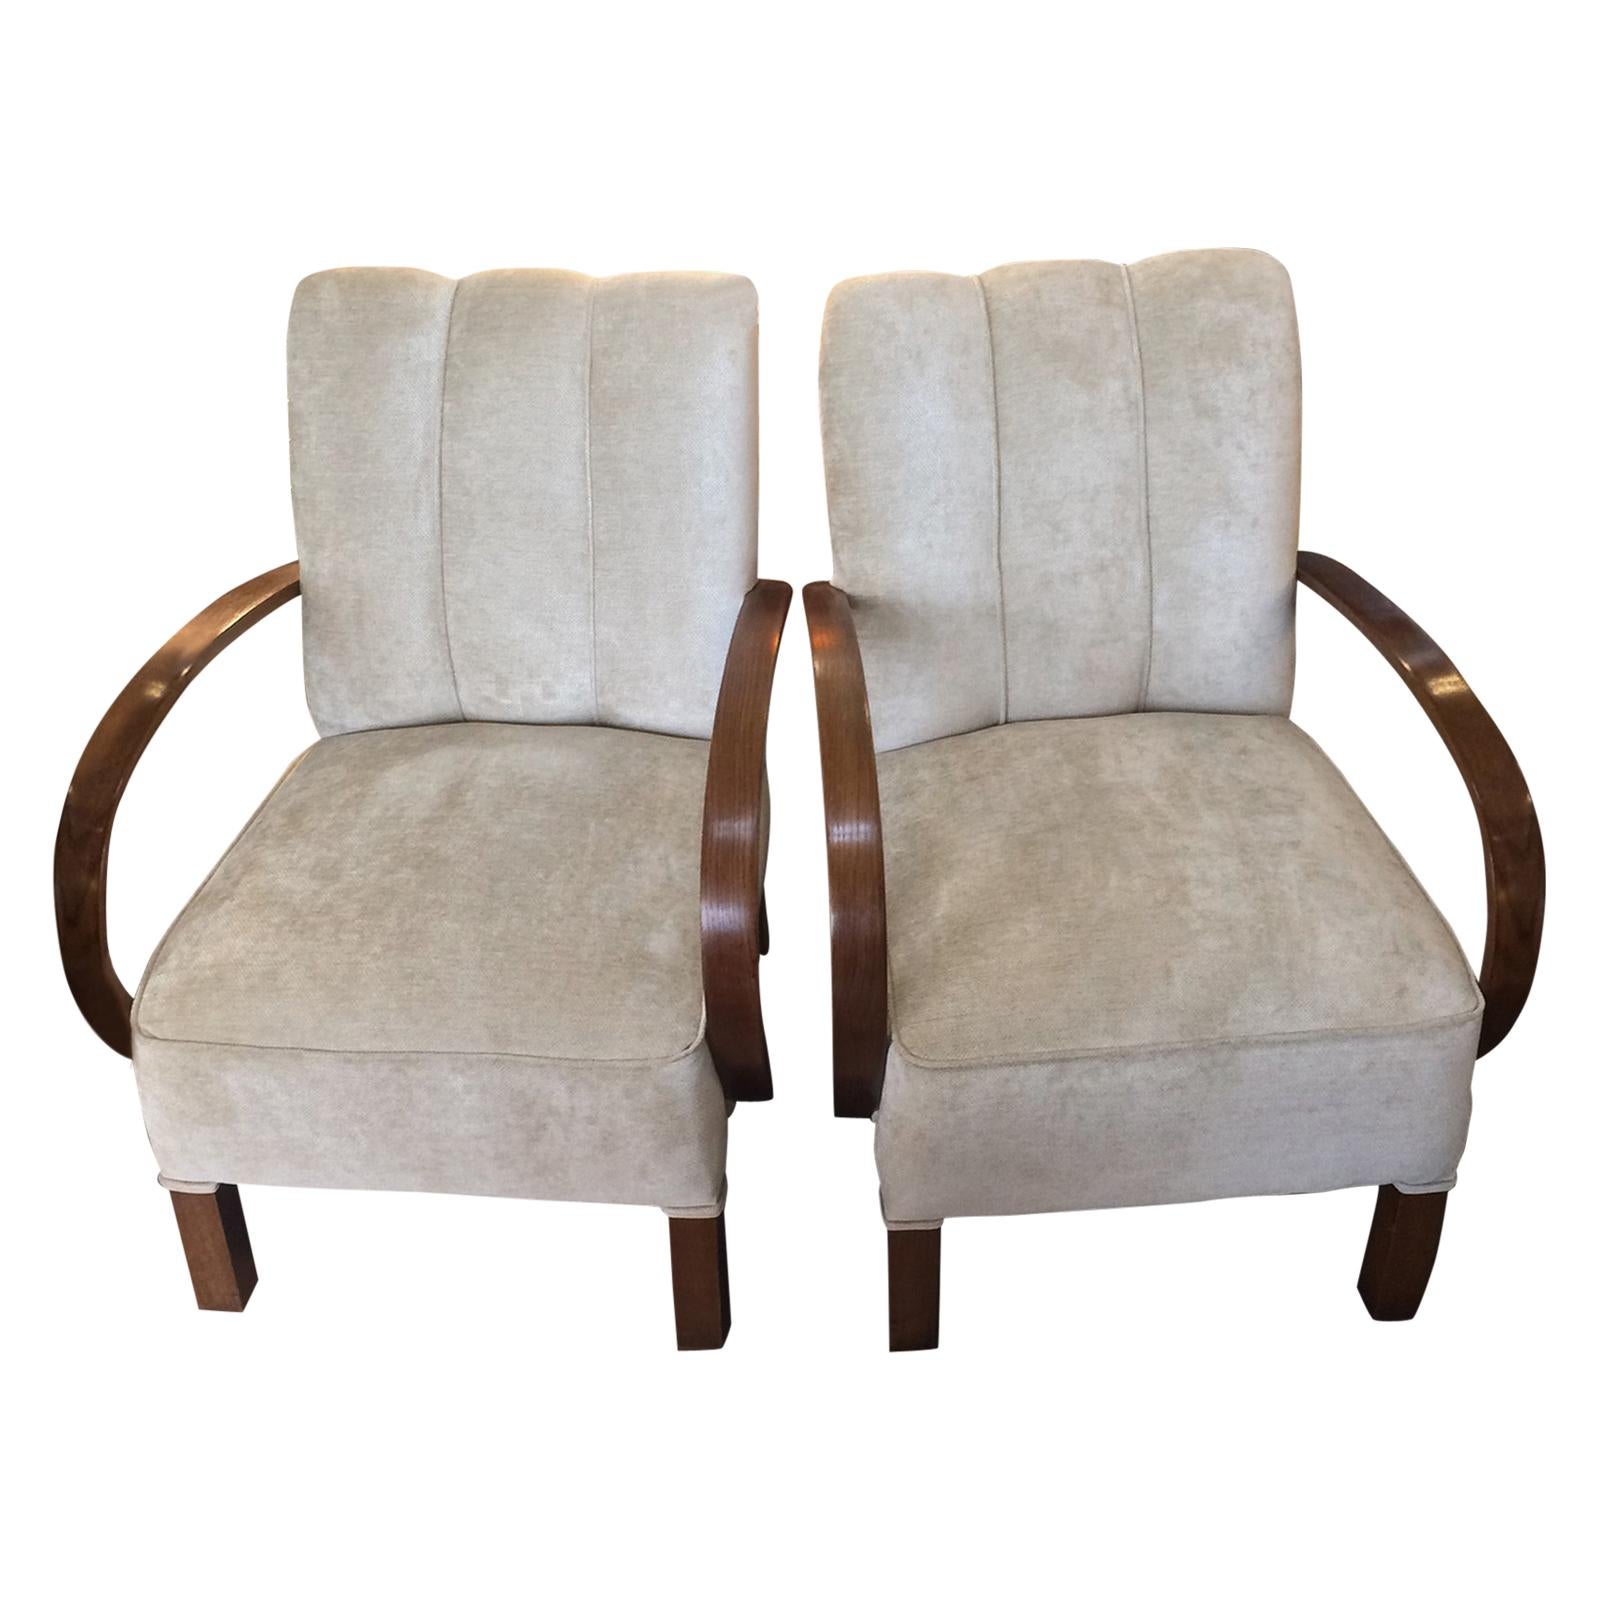 Pair of Art Deco circa 1930 German Armchairs Chairs Reupholstered